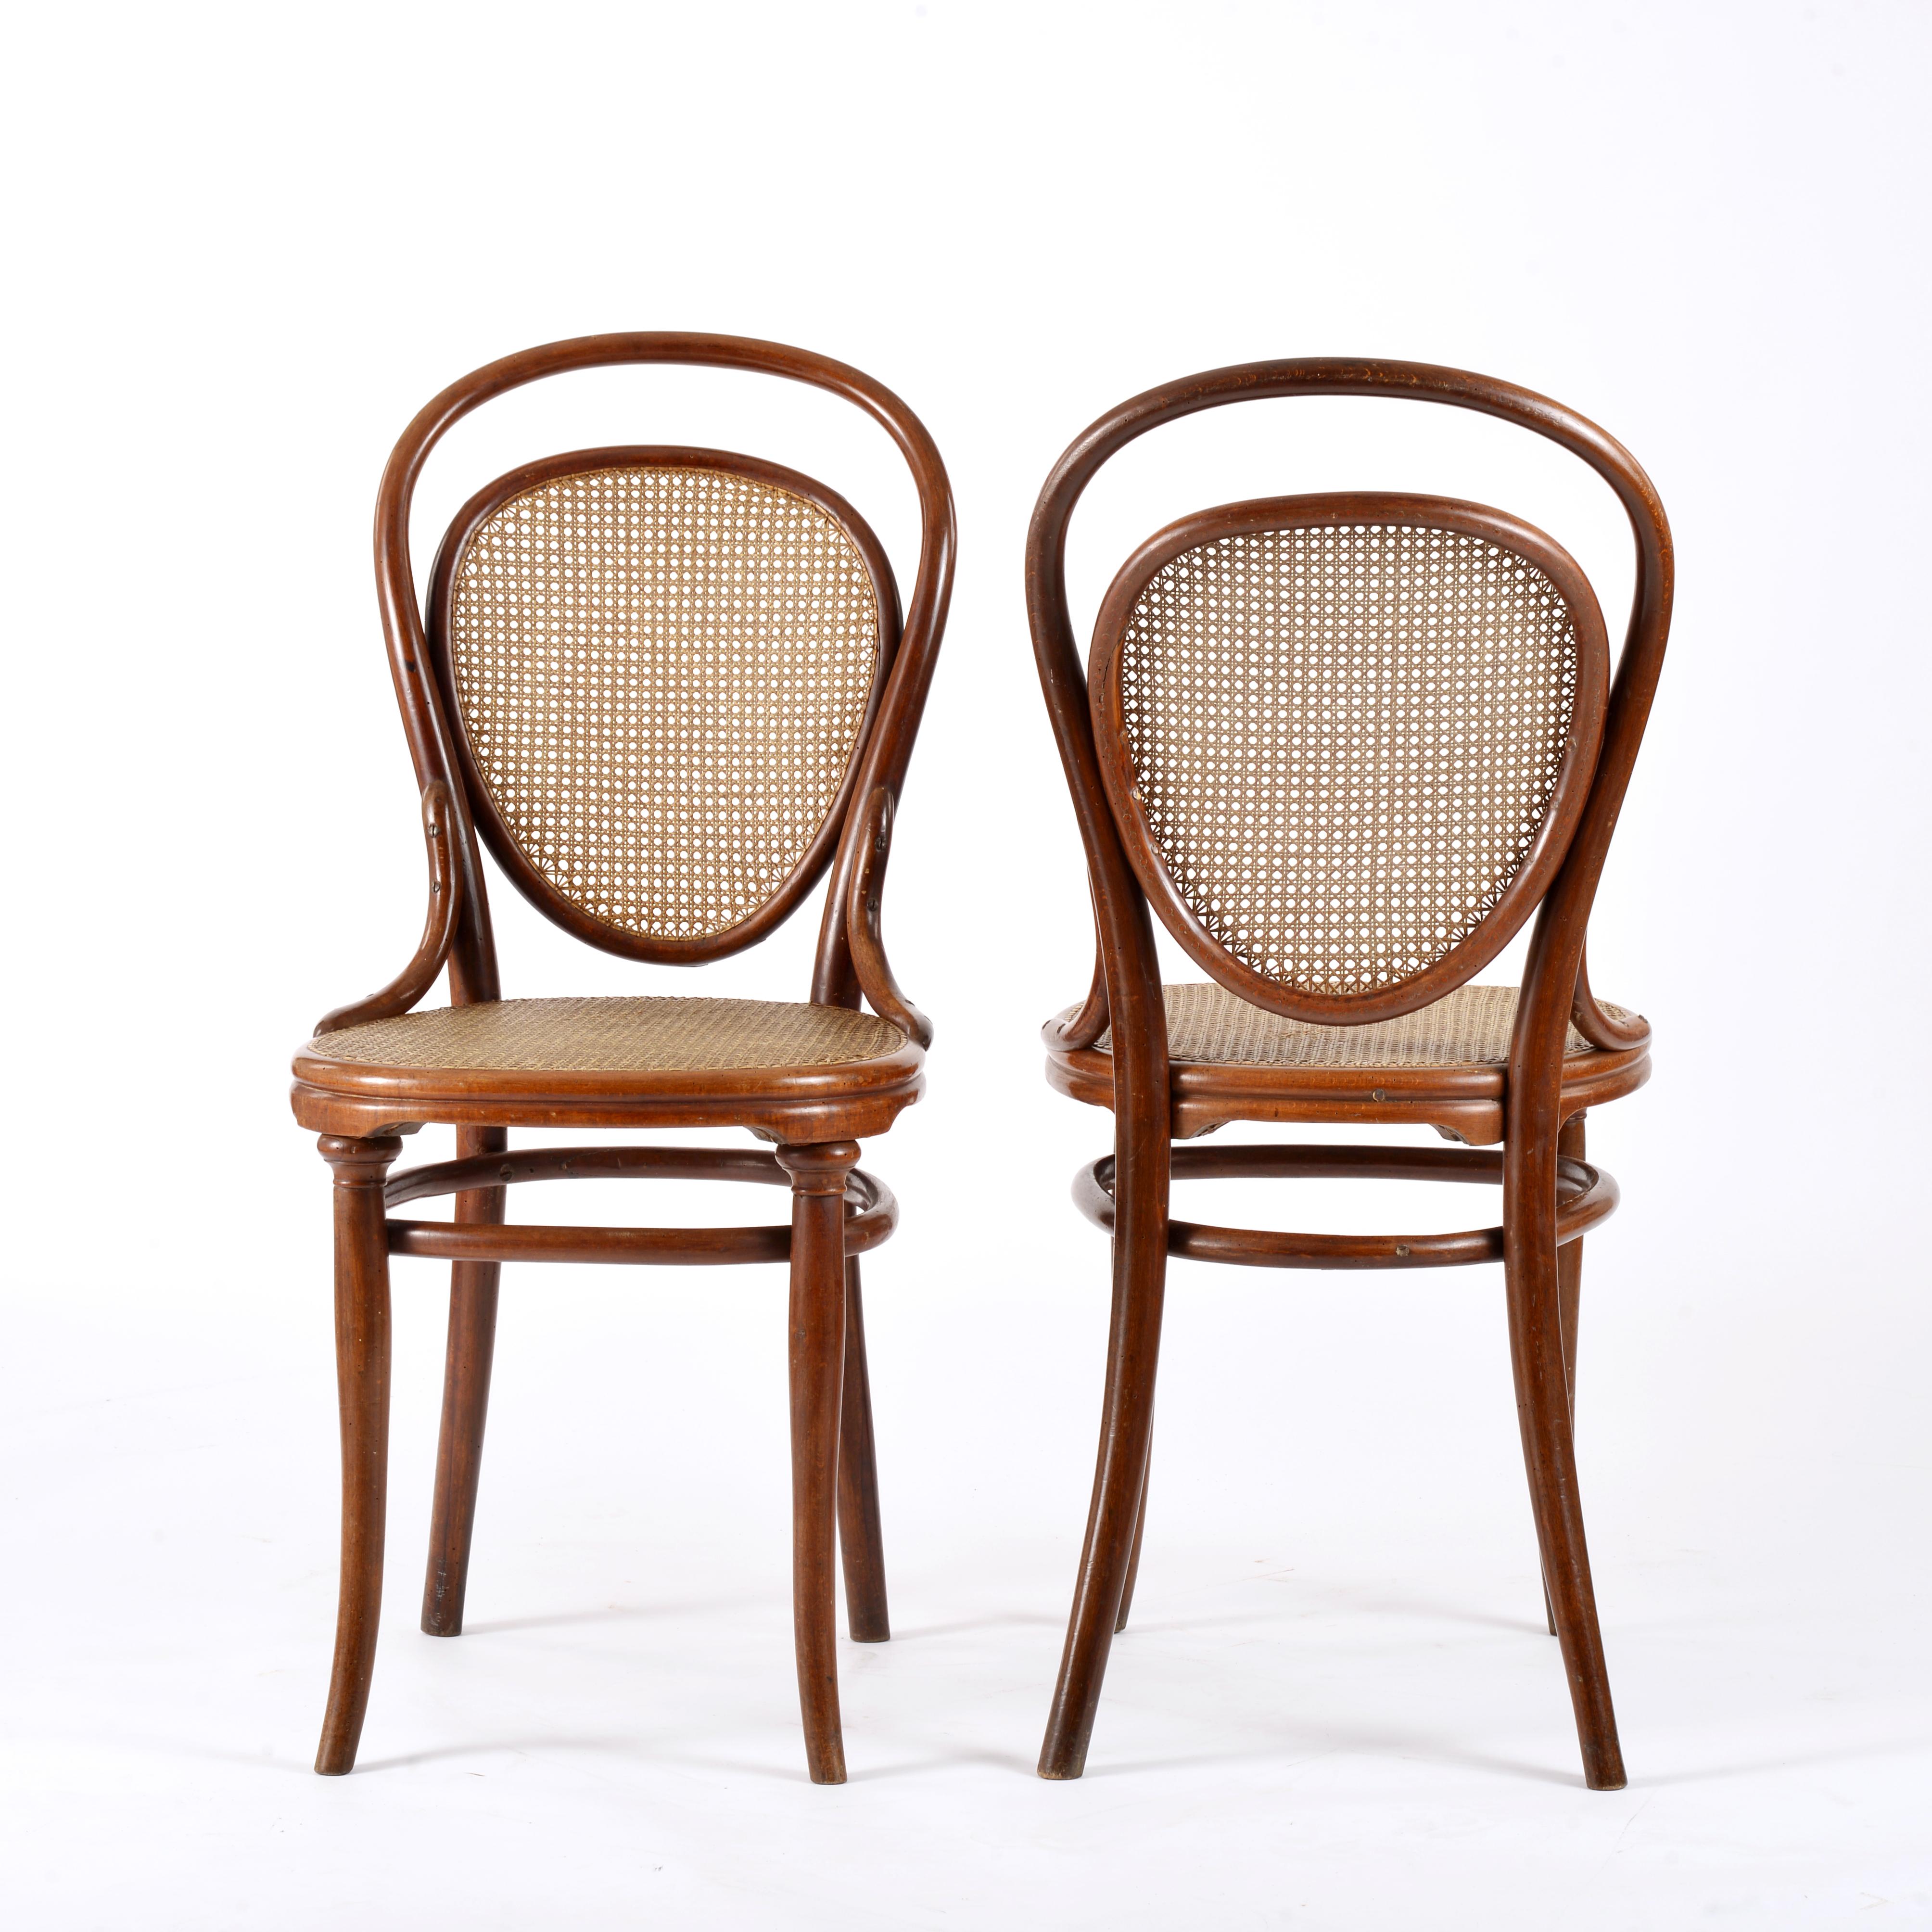 19th Century 4 bentwood chairs, number 7, published by Thonet at the end of the 19th century.